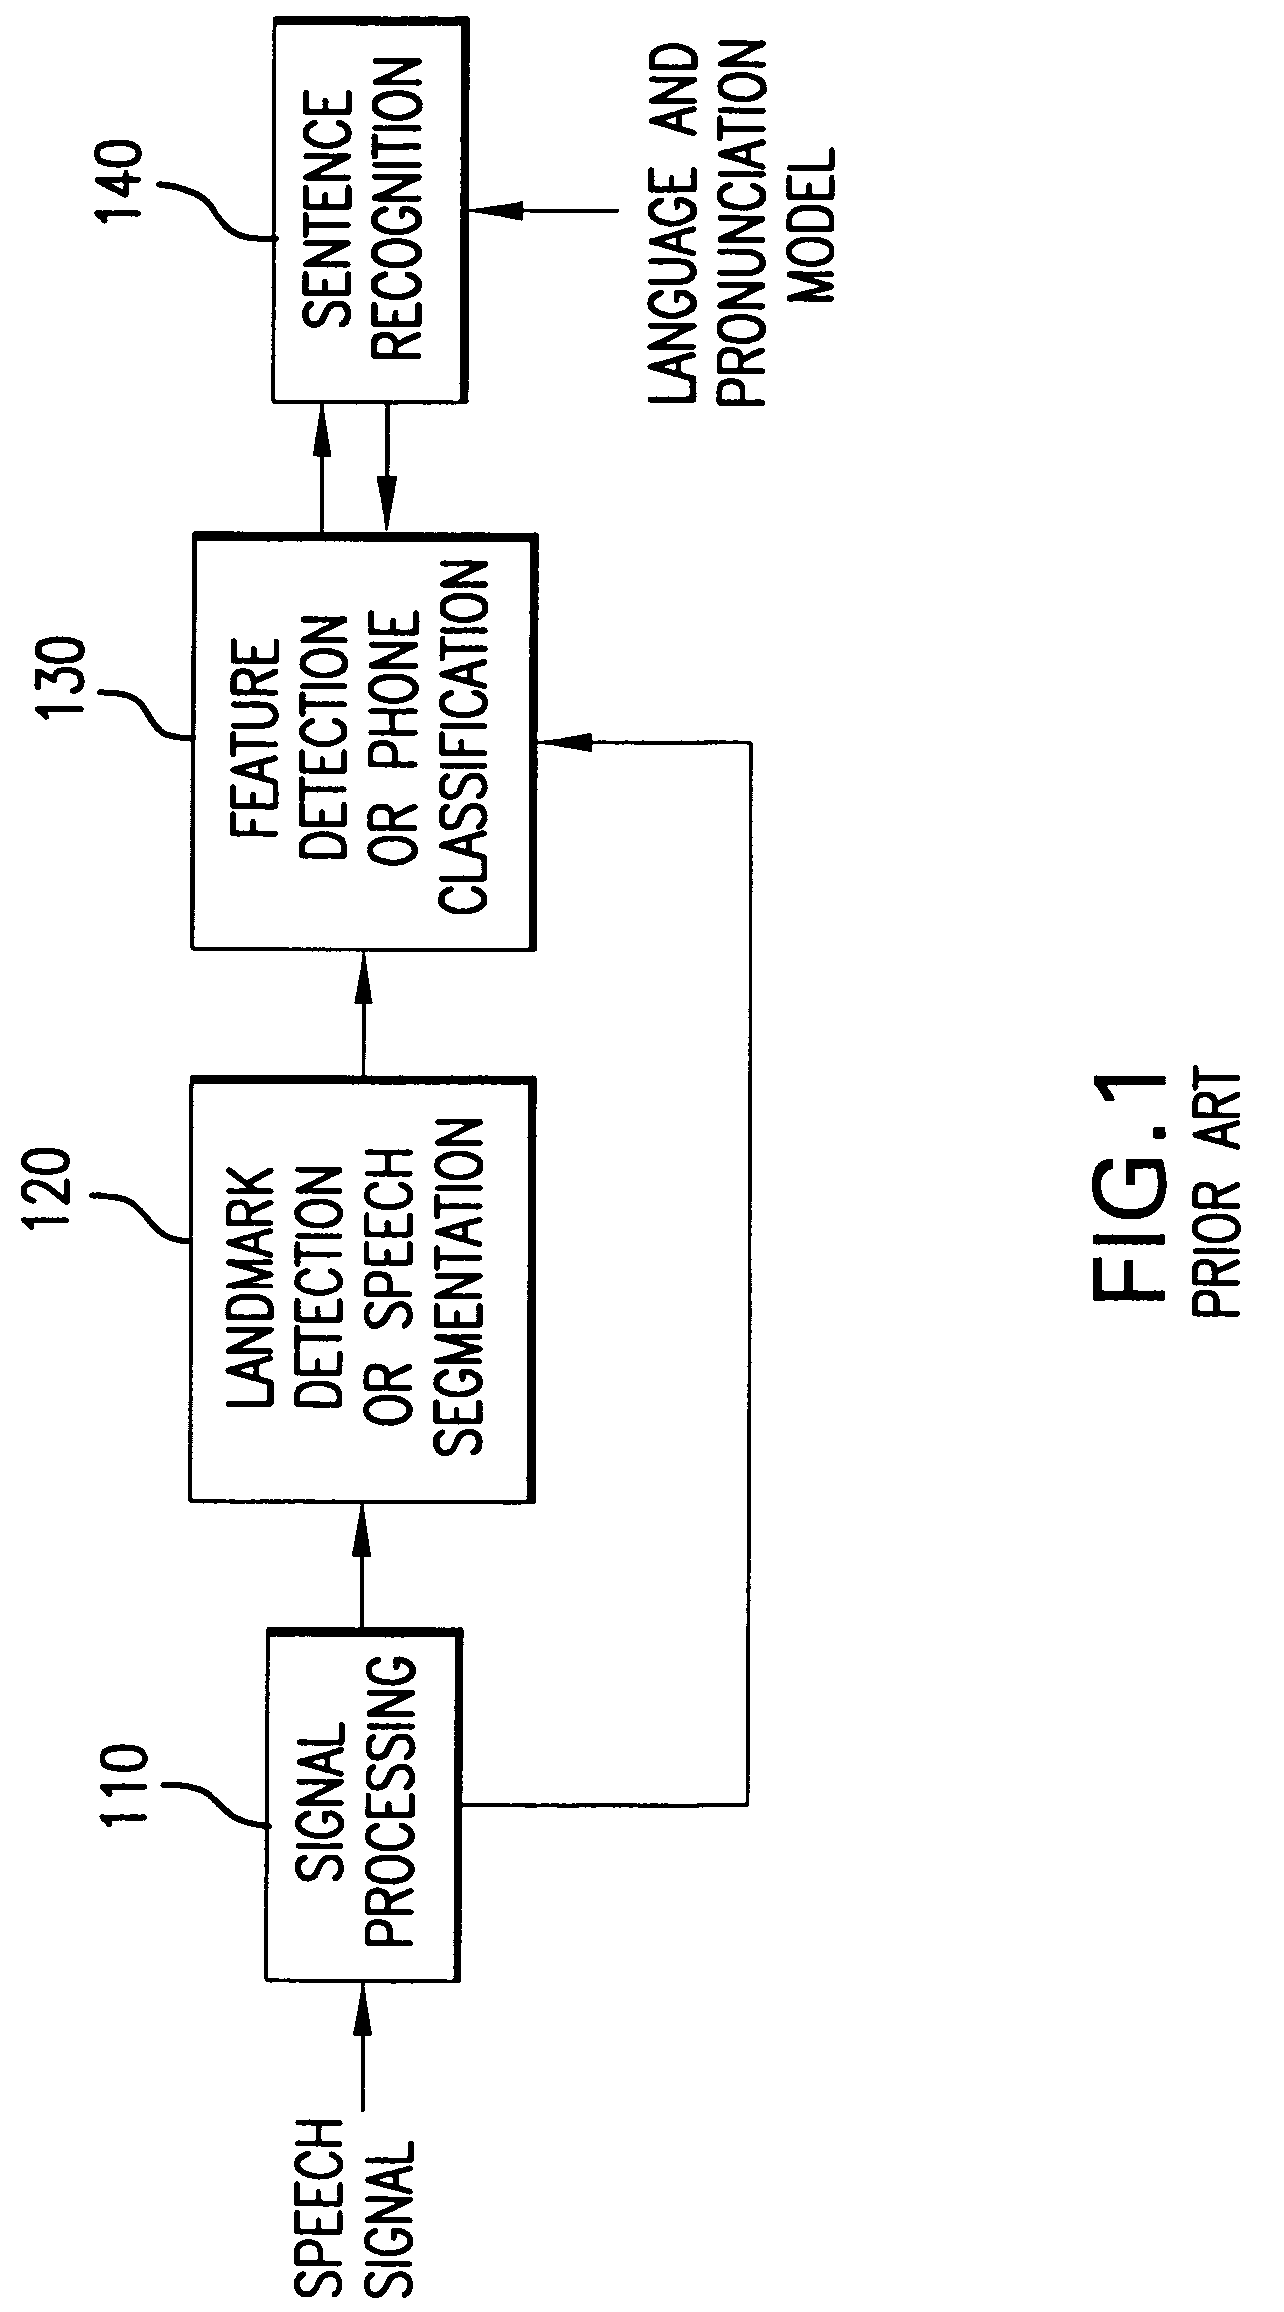 System and method for automatic speech recognition from phonetic features and acoustic landmarks